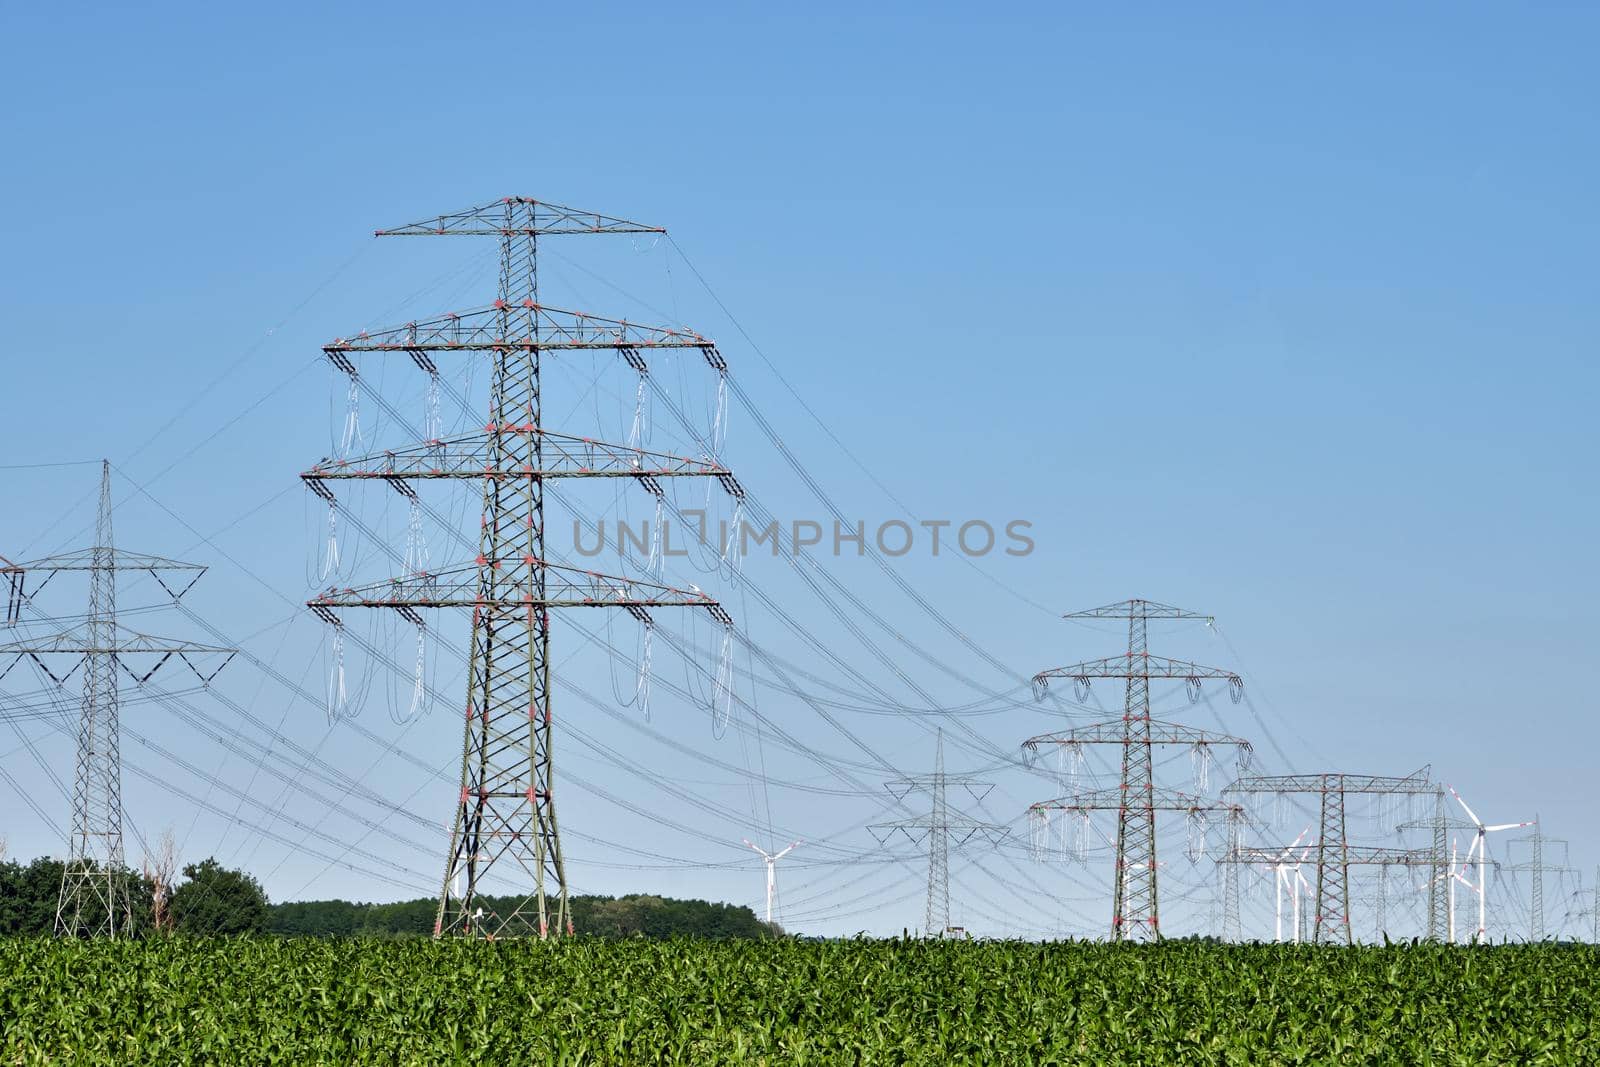 Electricity pylons and power lines with wind turbines in the back seen in Germany